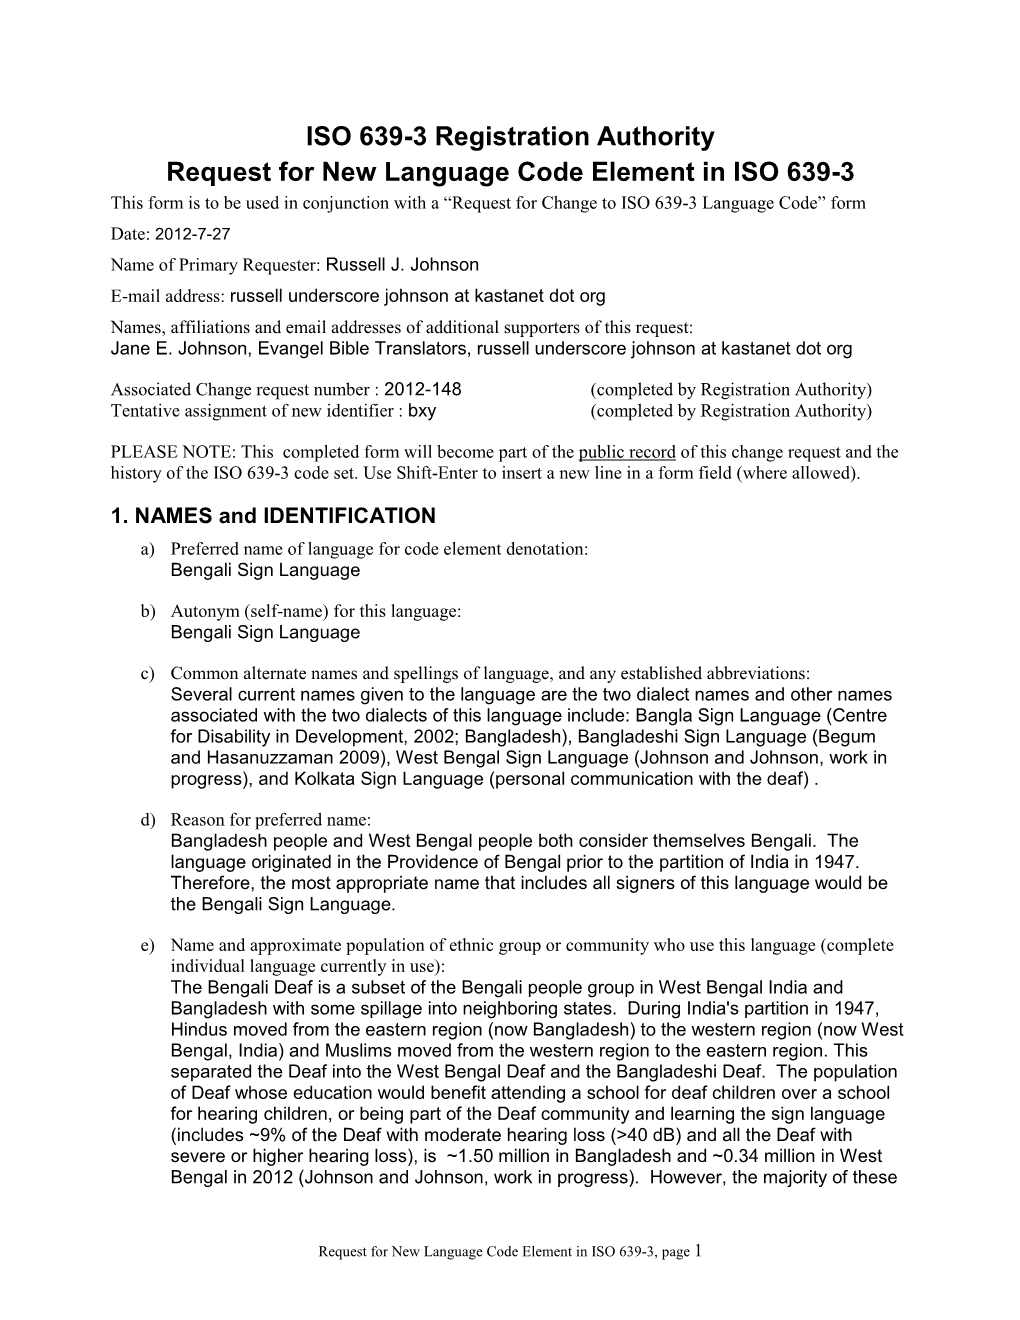 ISO 639-3 Registration Authority Request for New Language Code